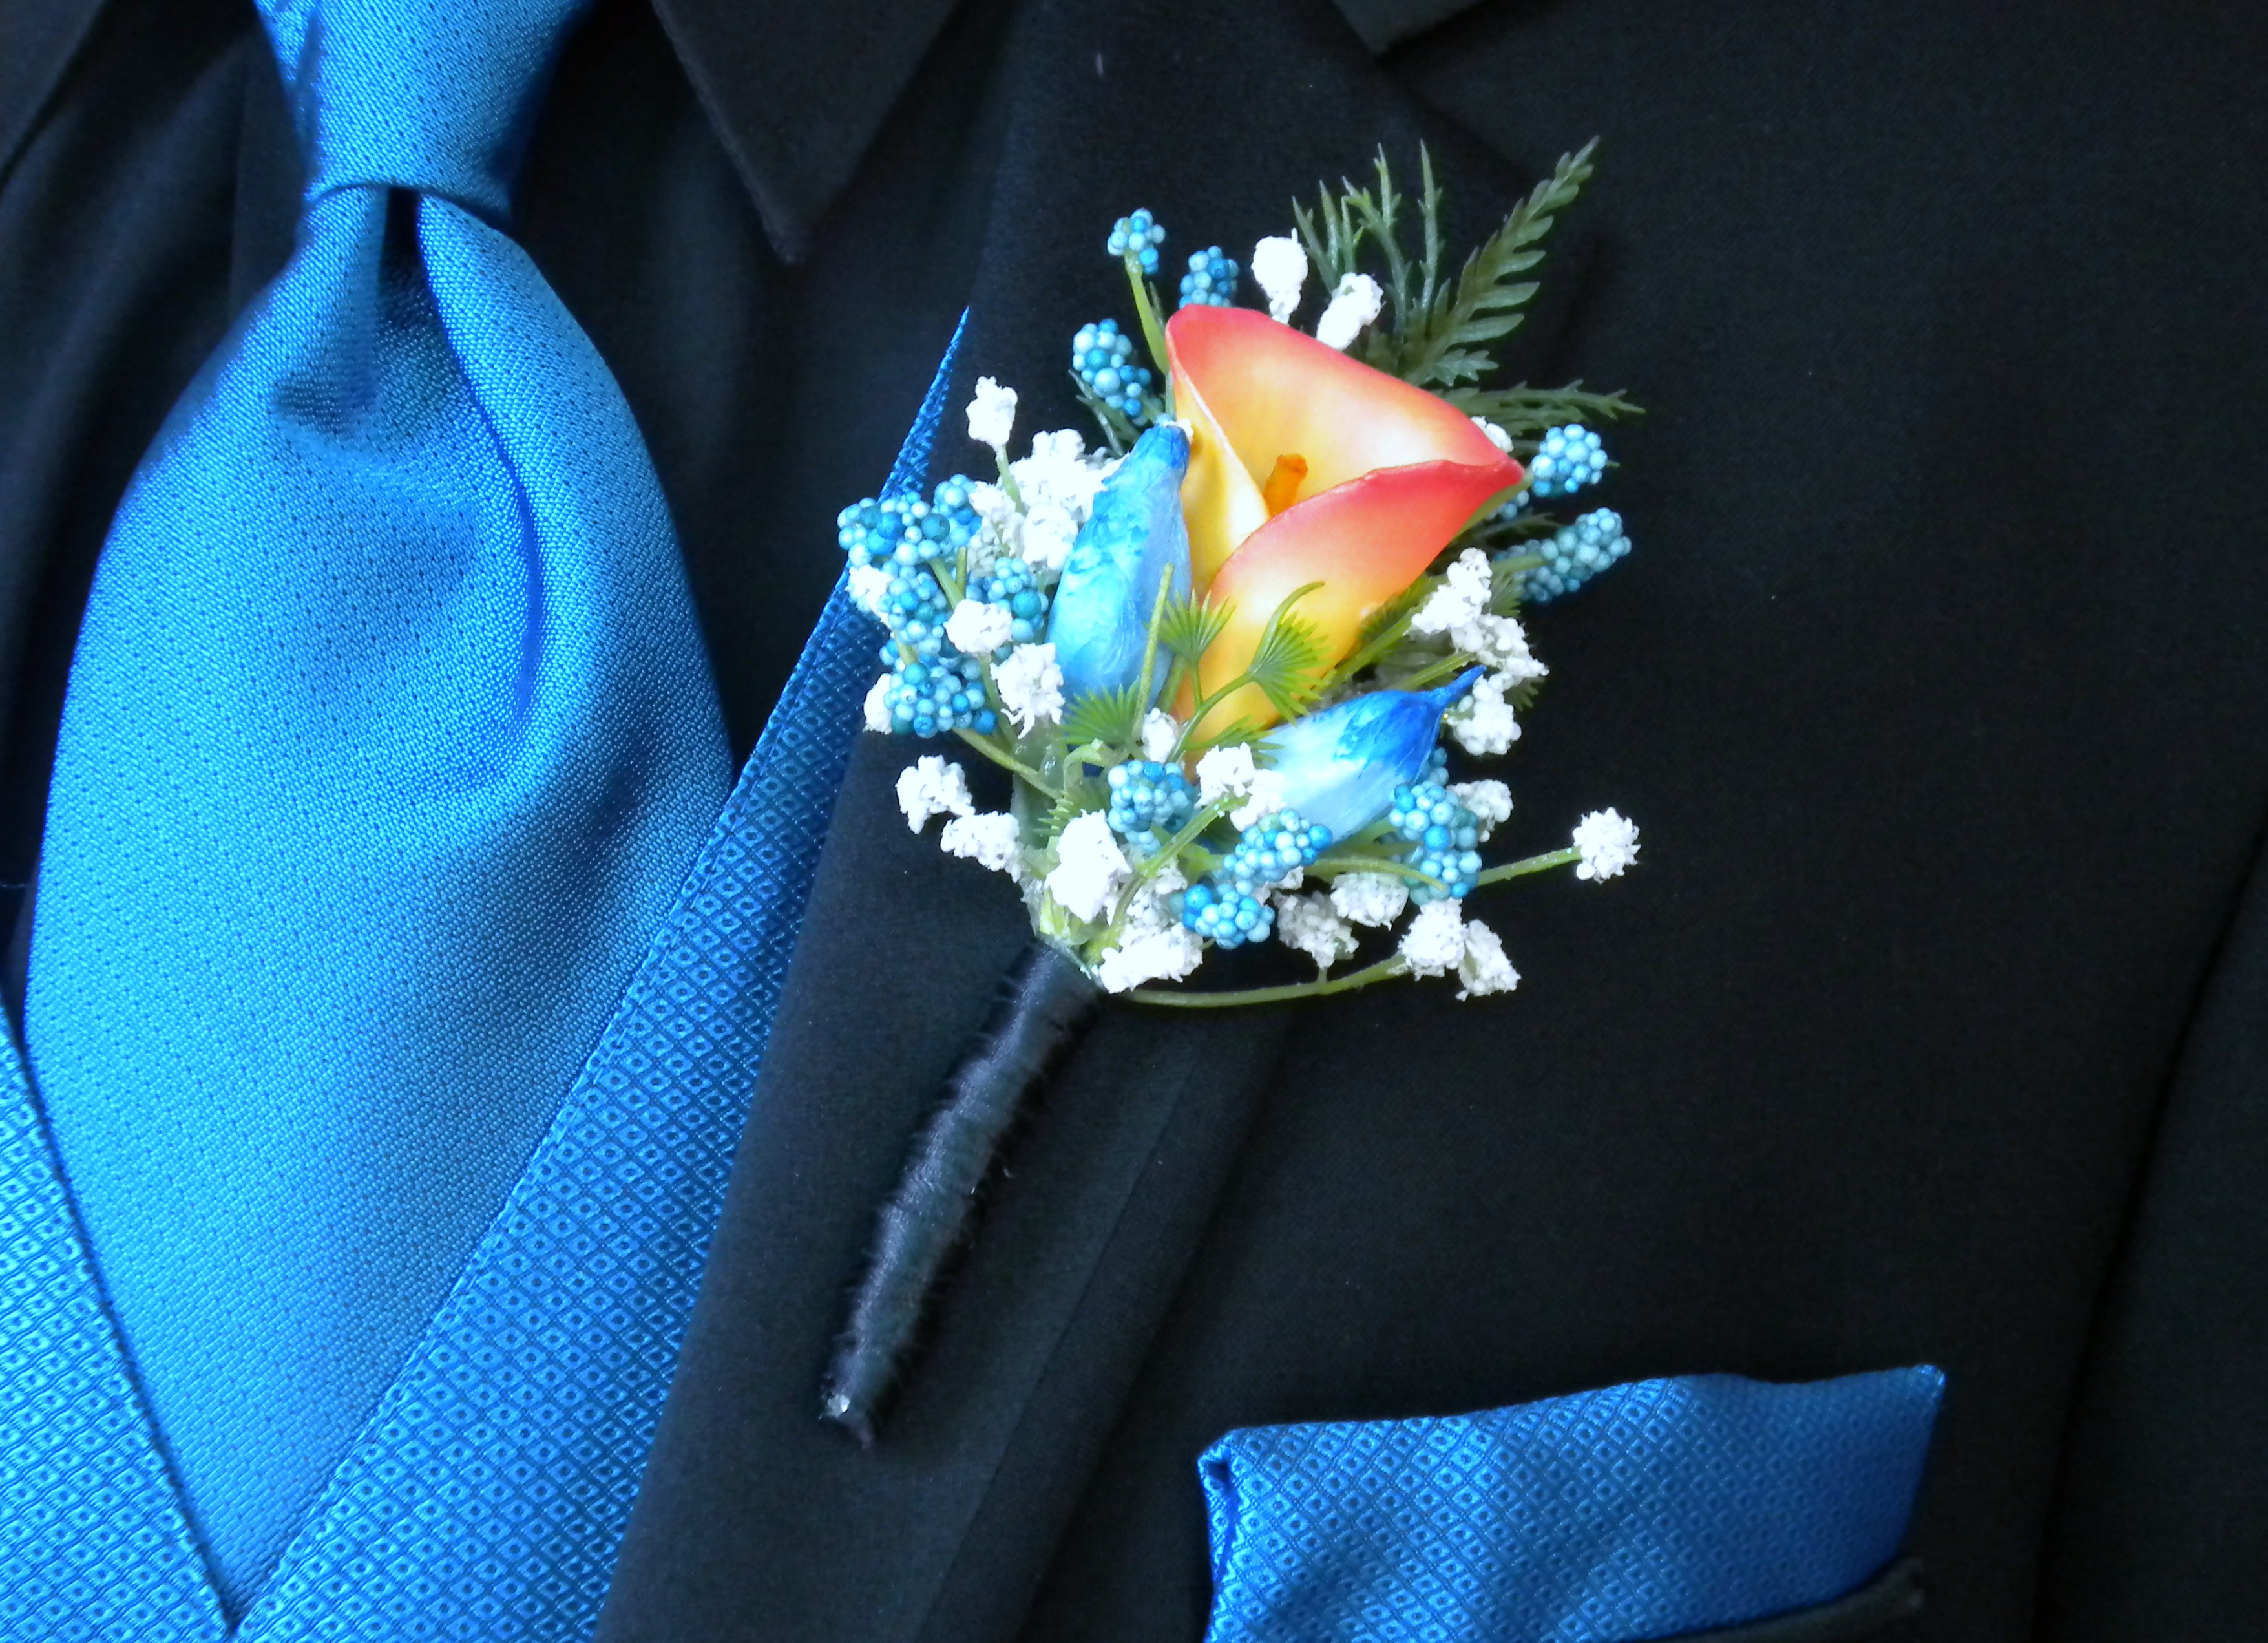 orange calla lily boutonniere with blue flowers and baby's breath against a black tuxedo and blue vest